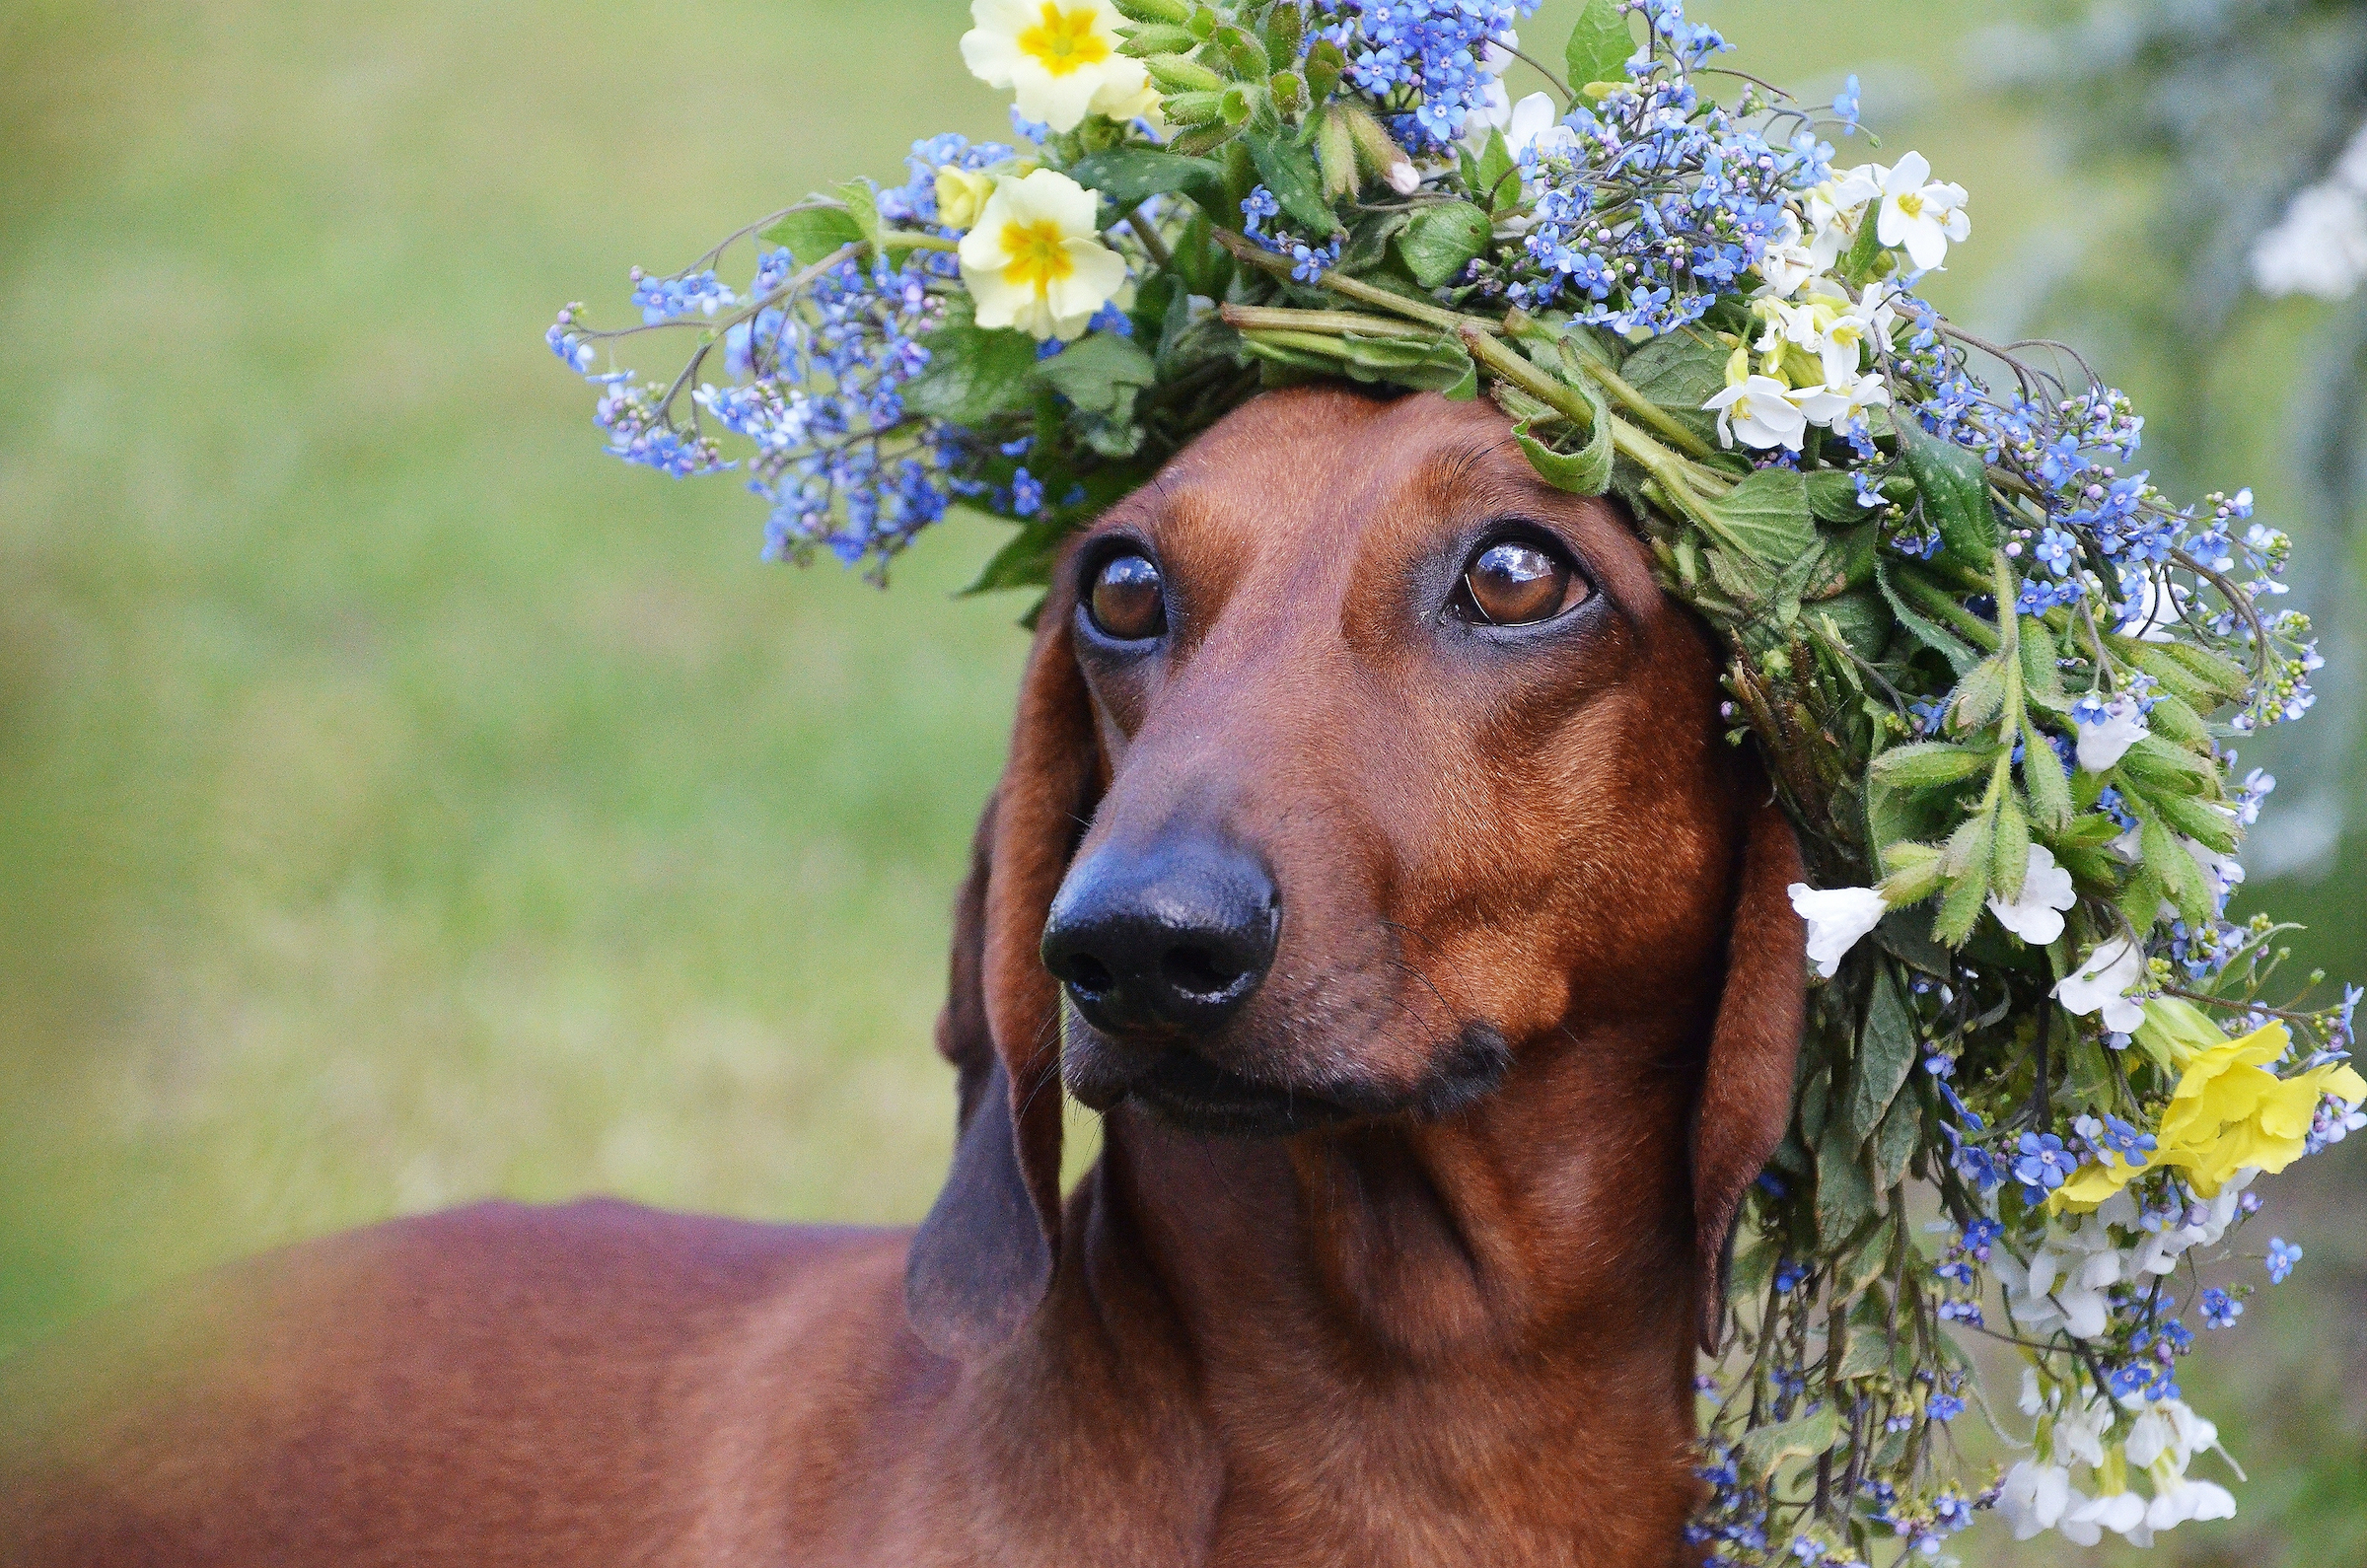 A Dachshund stands still with a flower crown on her head